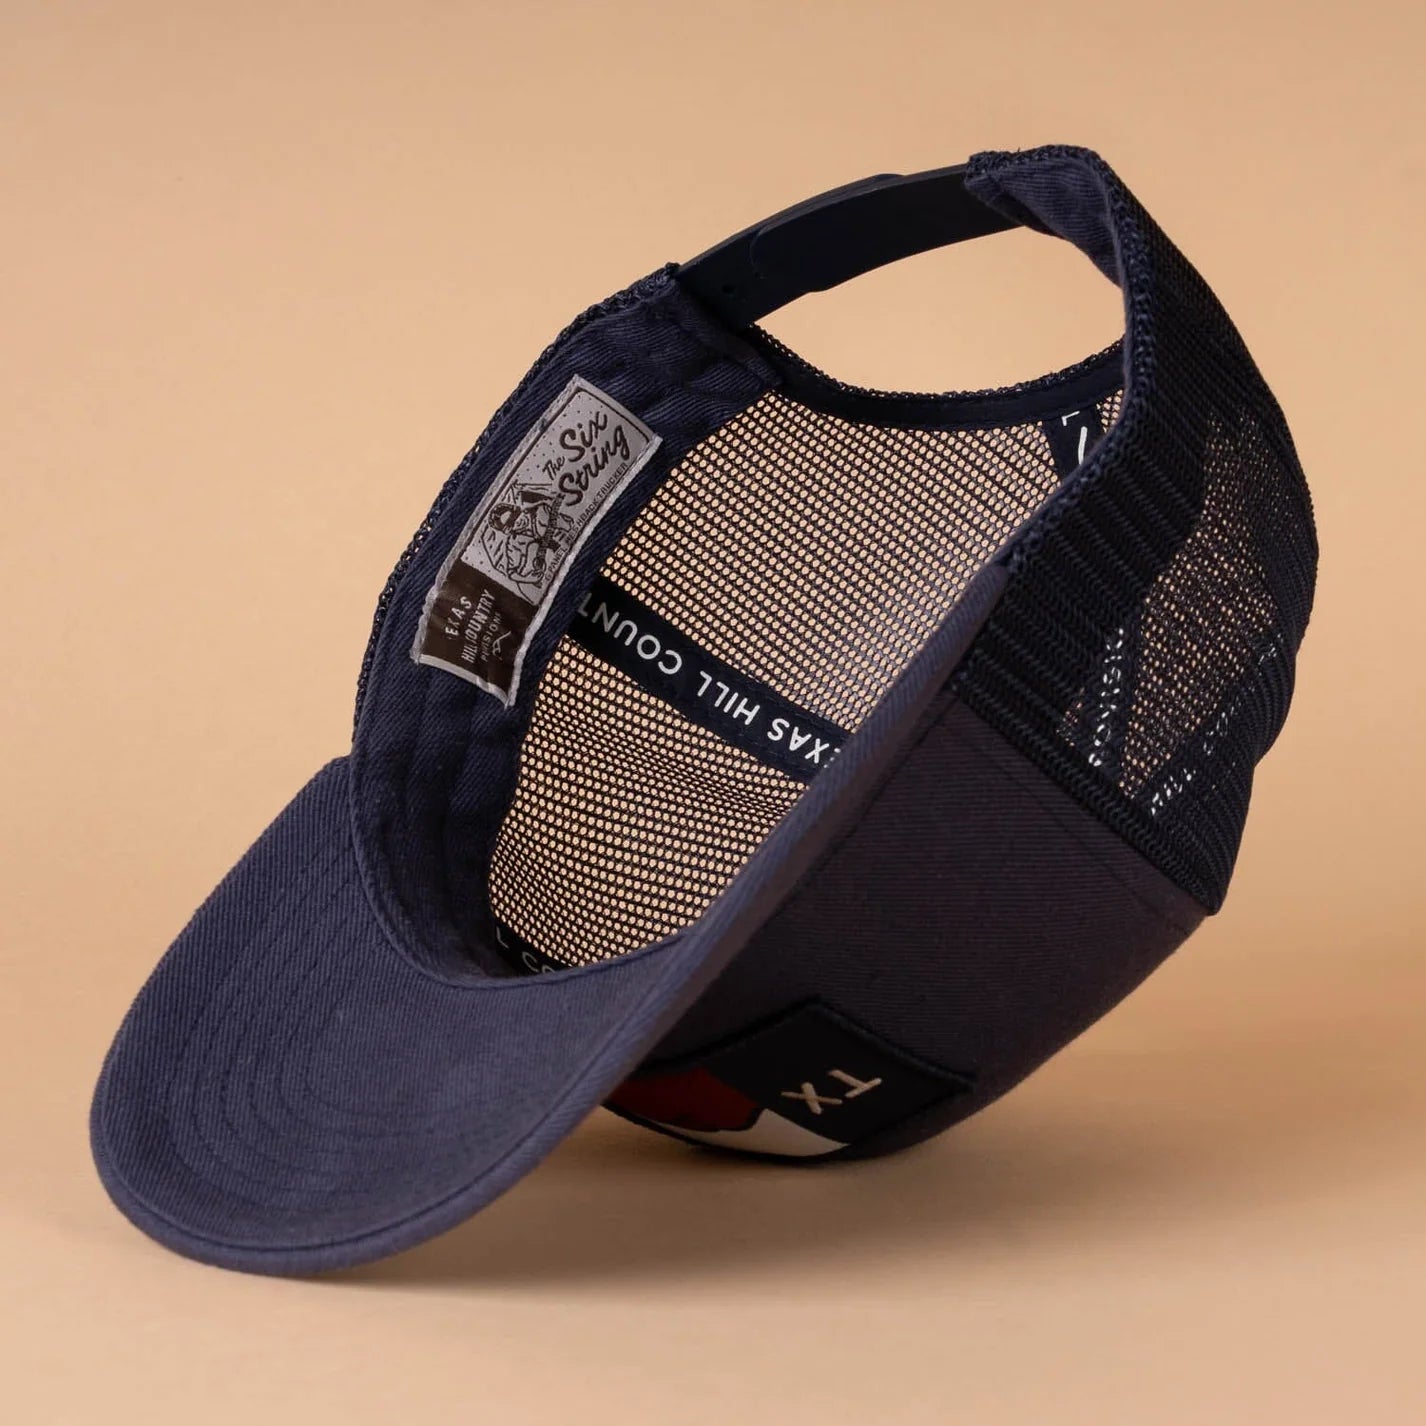 Hill Country Flag Hat